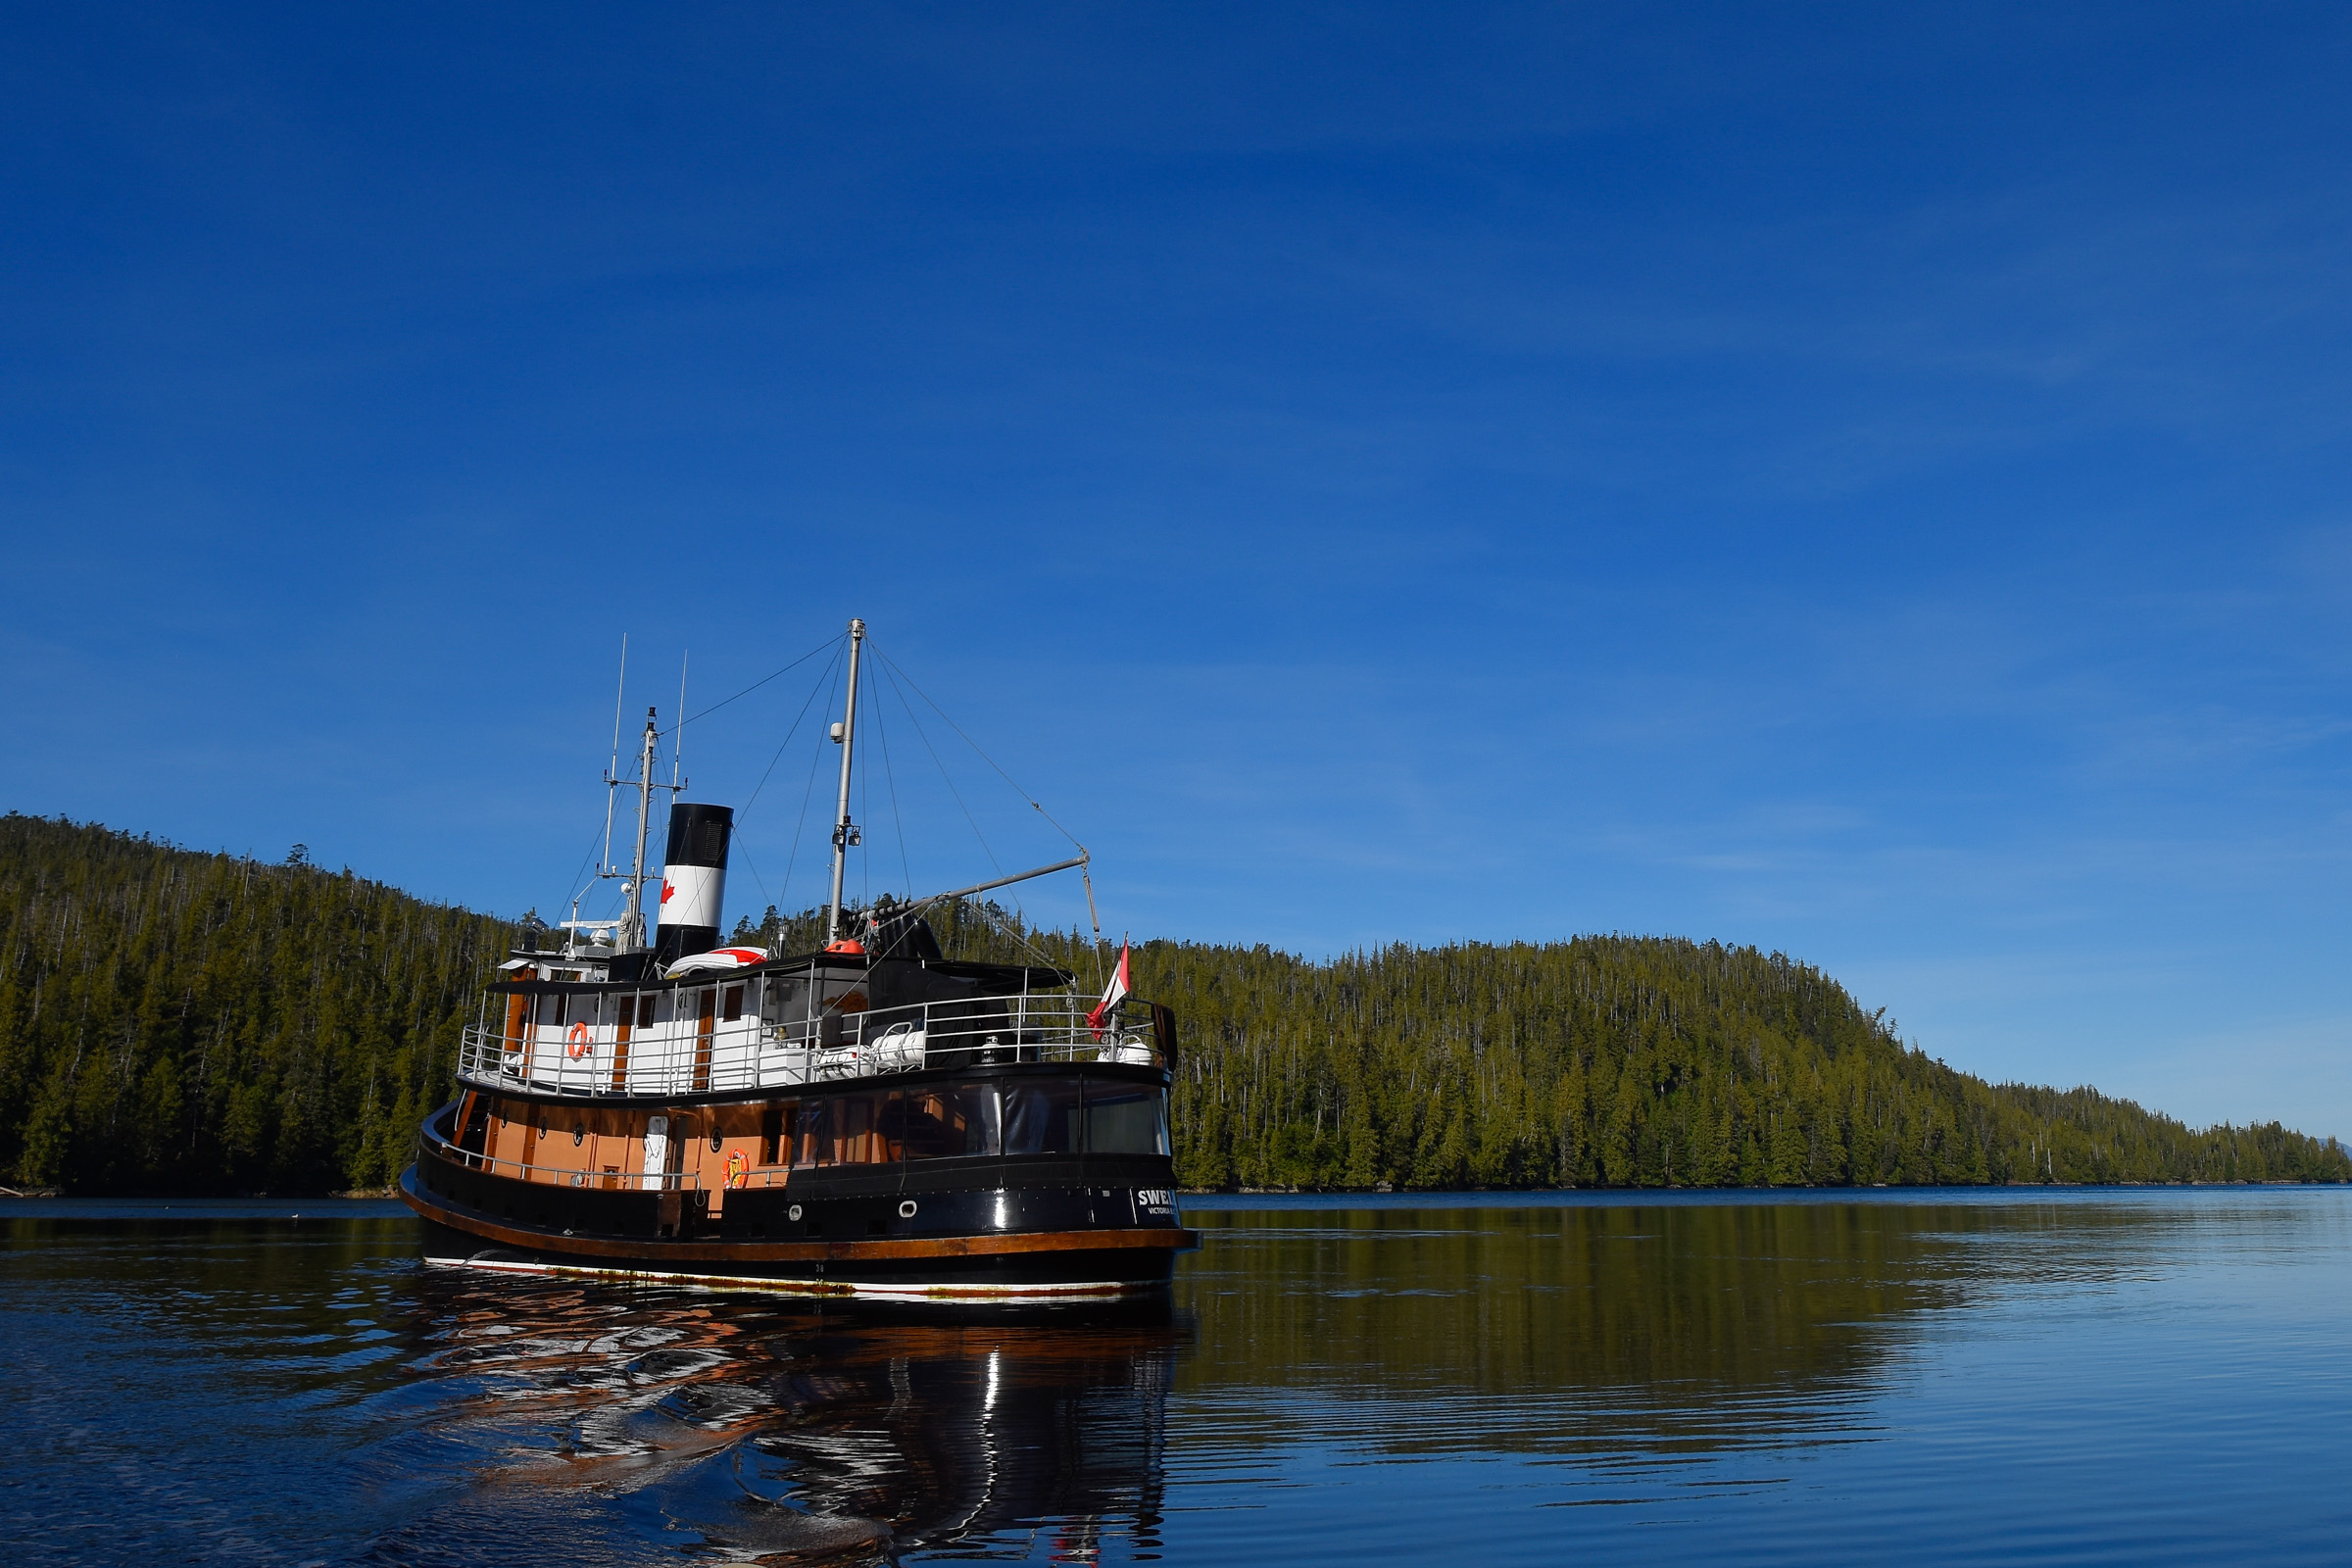 M.V. Swell at anchor in Racey Inlet, British Columbia